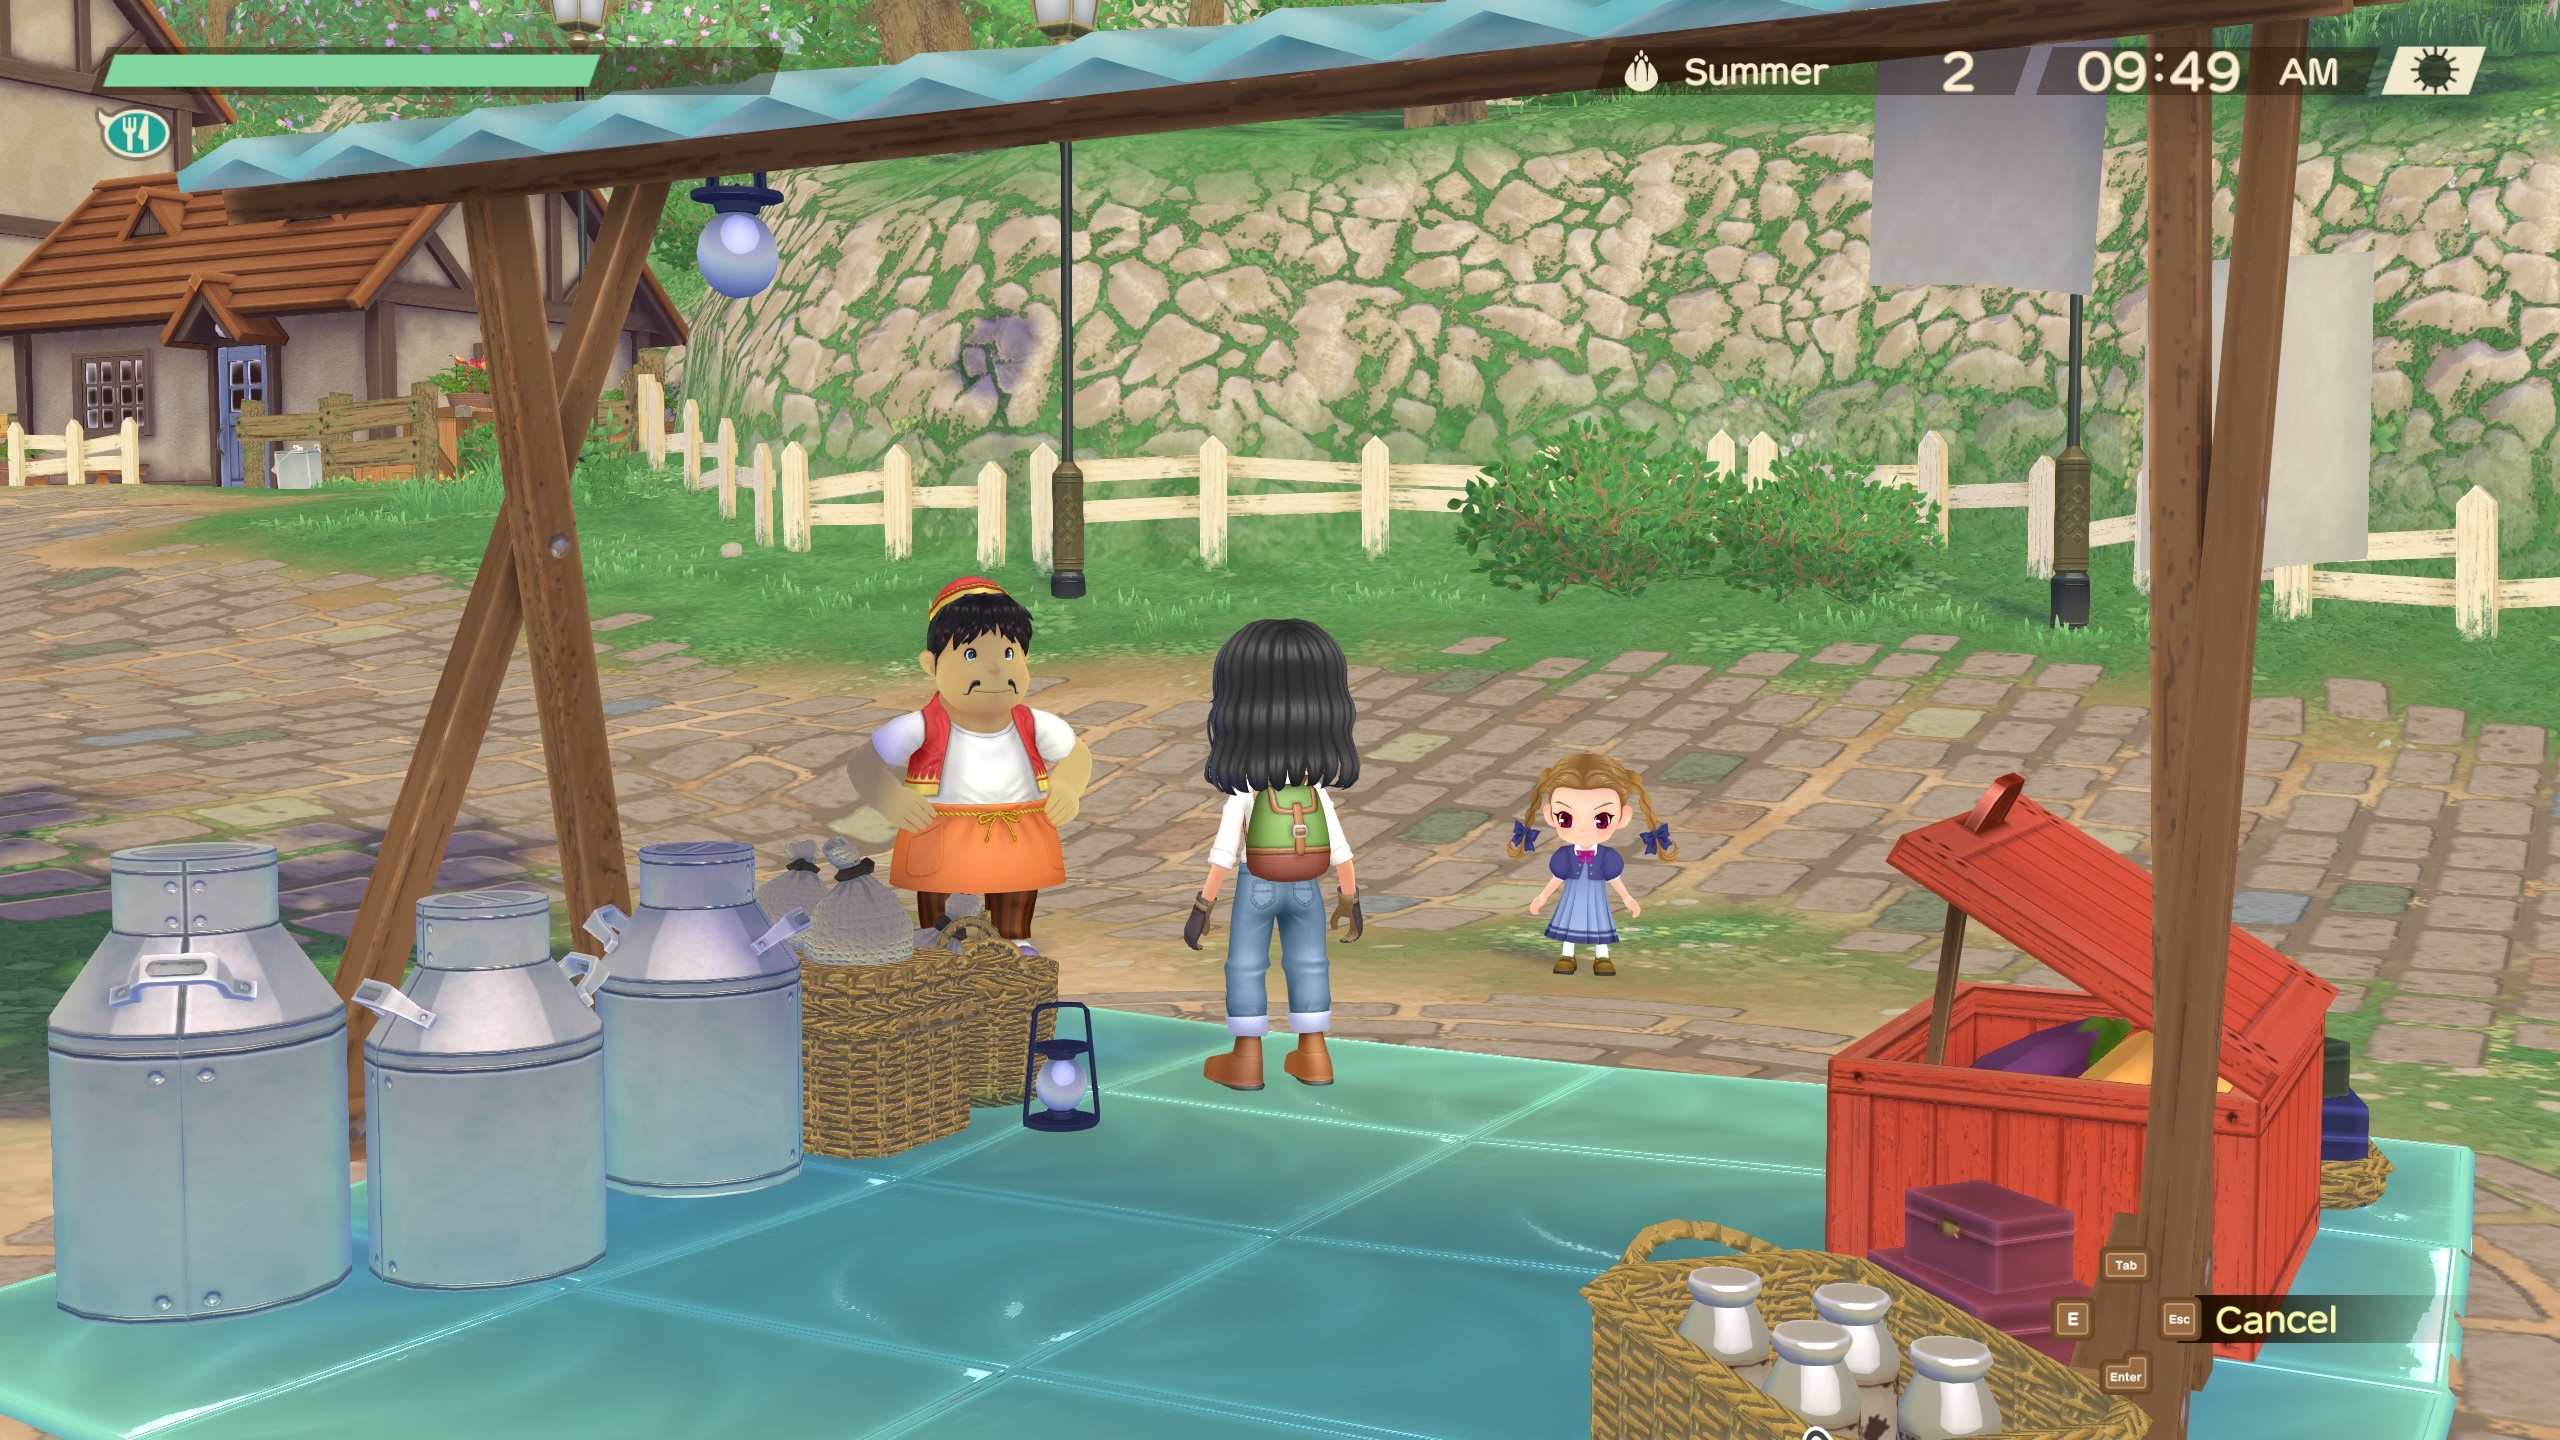 Story of Seasons: A Wonderful Life - a player stands underneath the canopy of their market stall in town while two characters wait to be helped